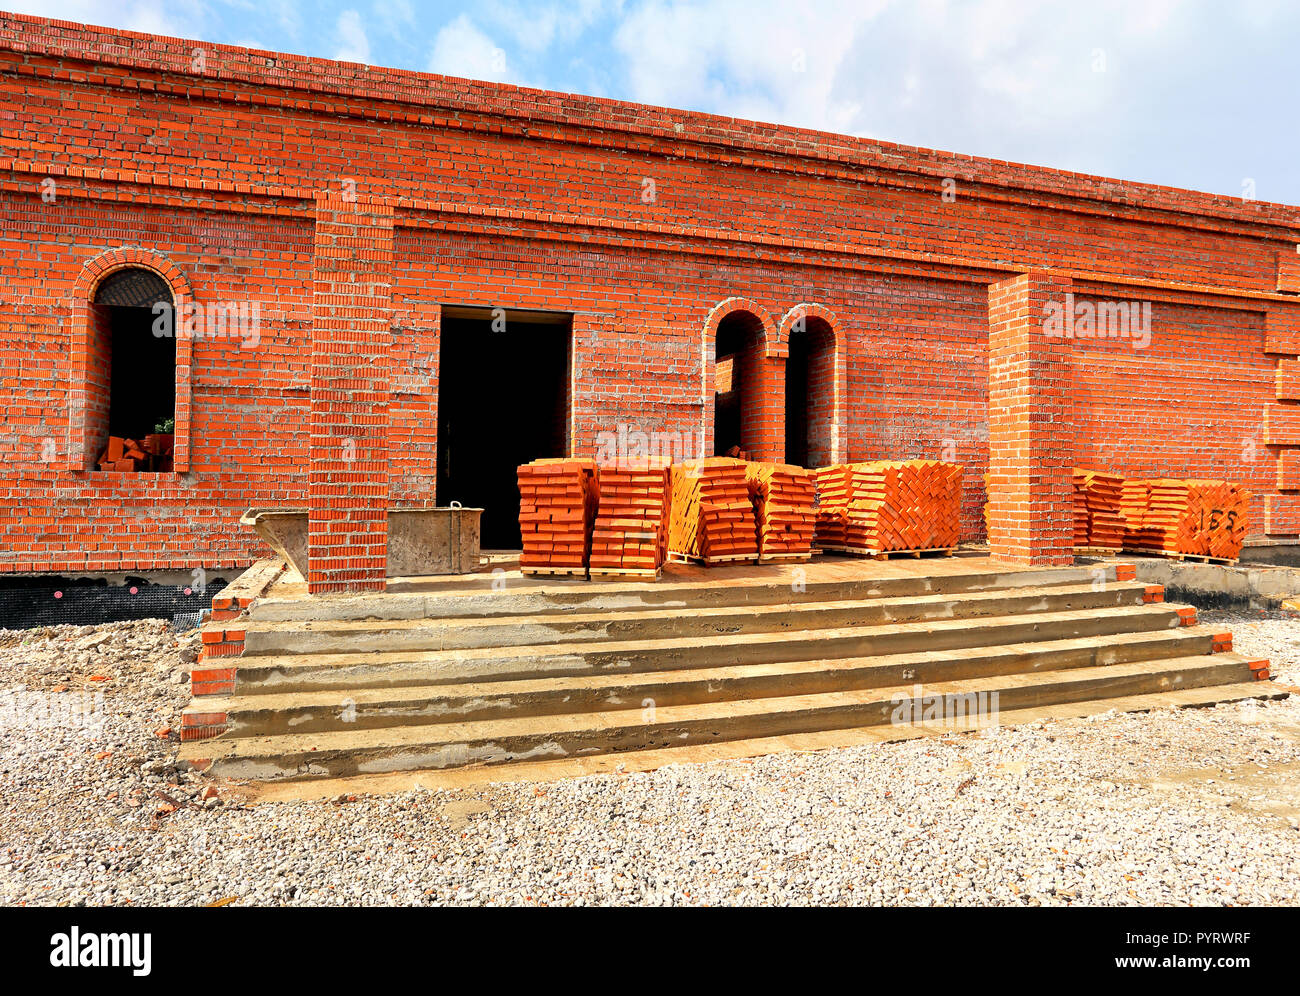 Red bricks on pallets near the wall of the building under construction Stock Photo